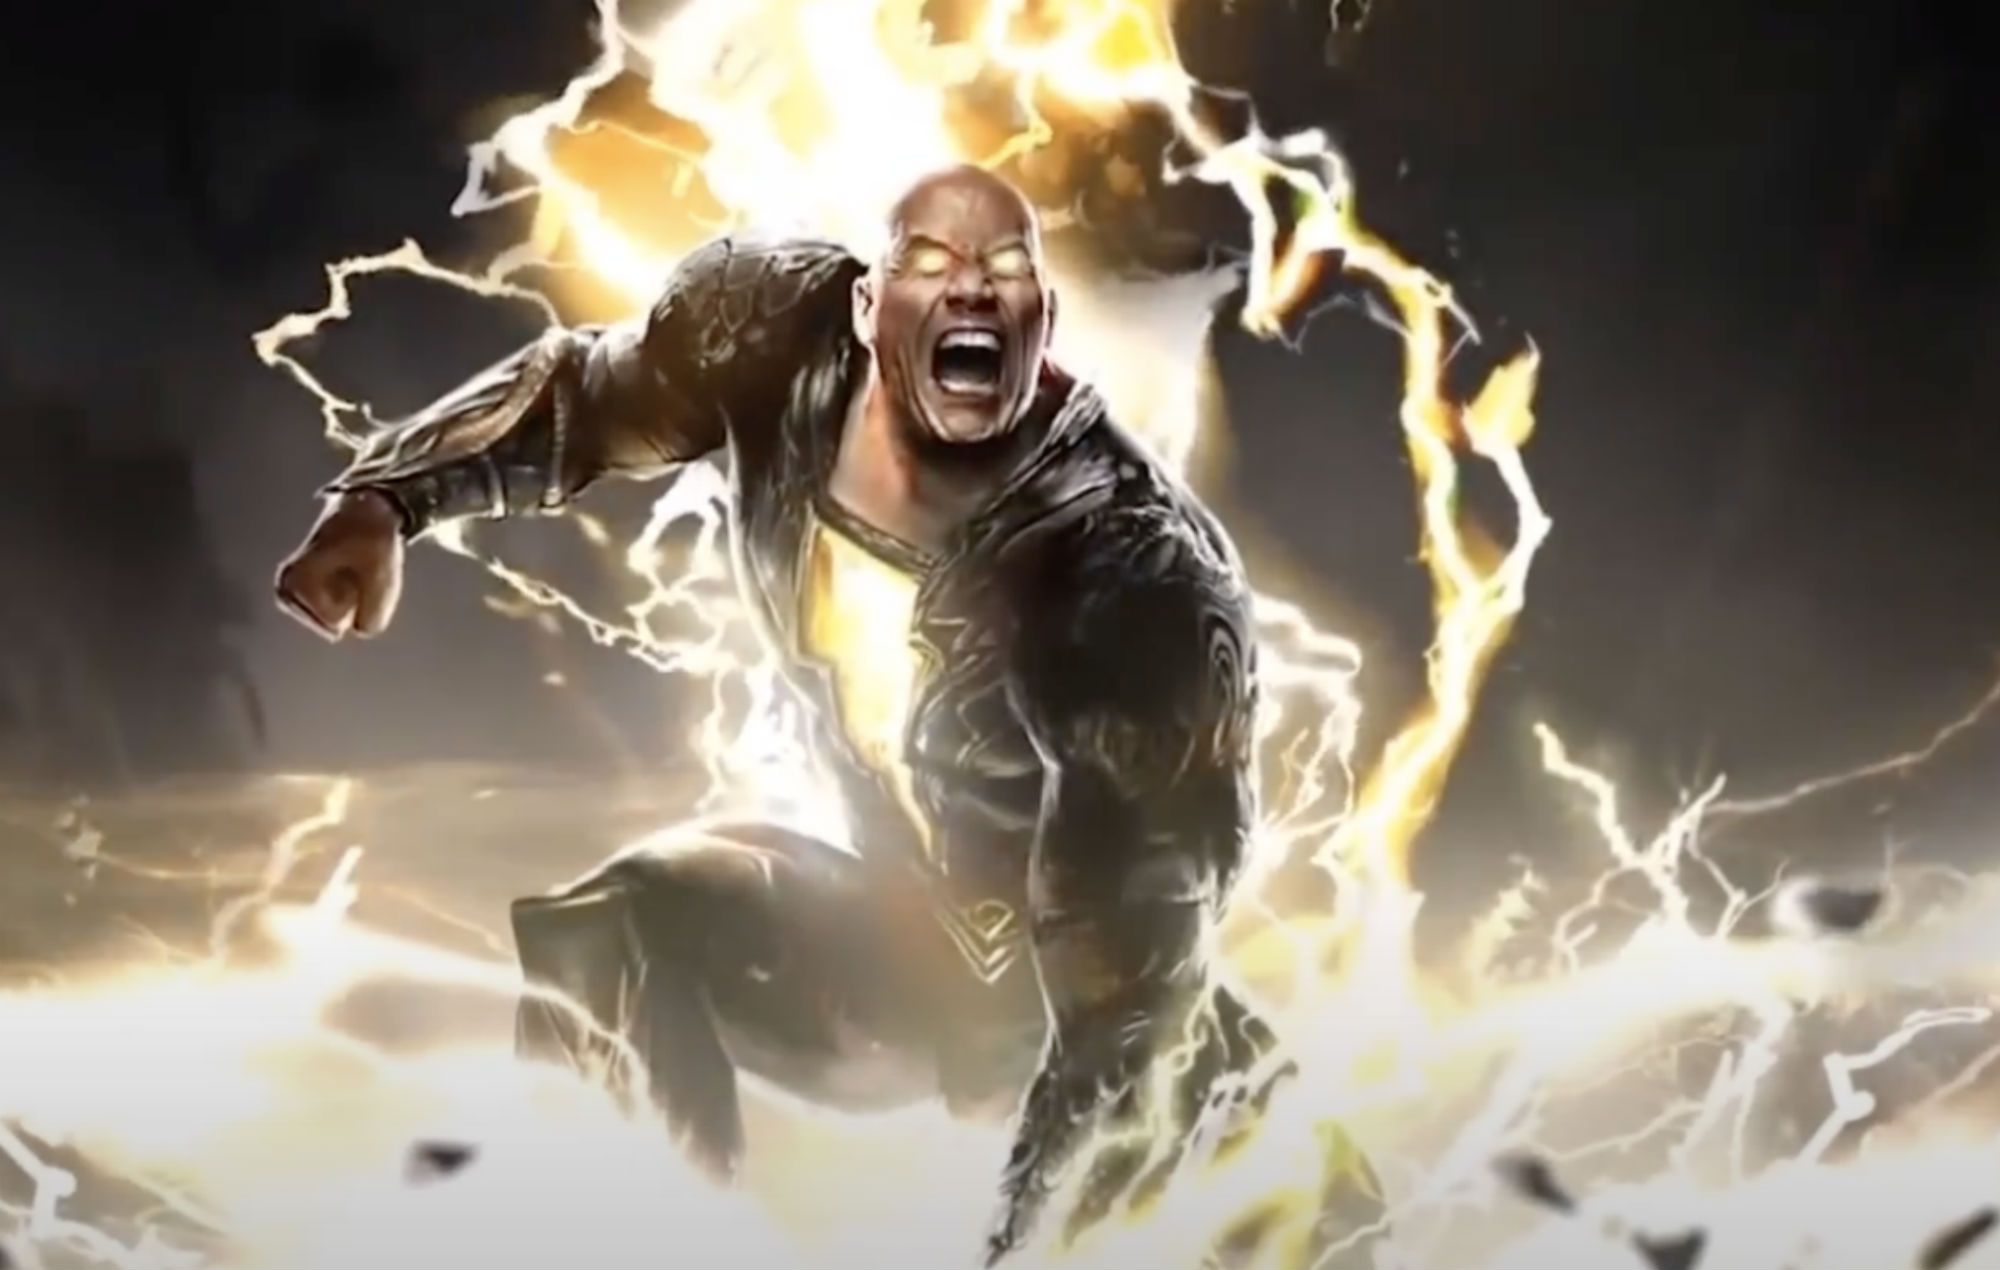 Dwayne 'The Rock' Johnson unveils first look at Black Adam character